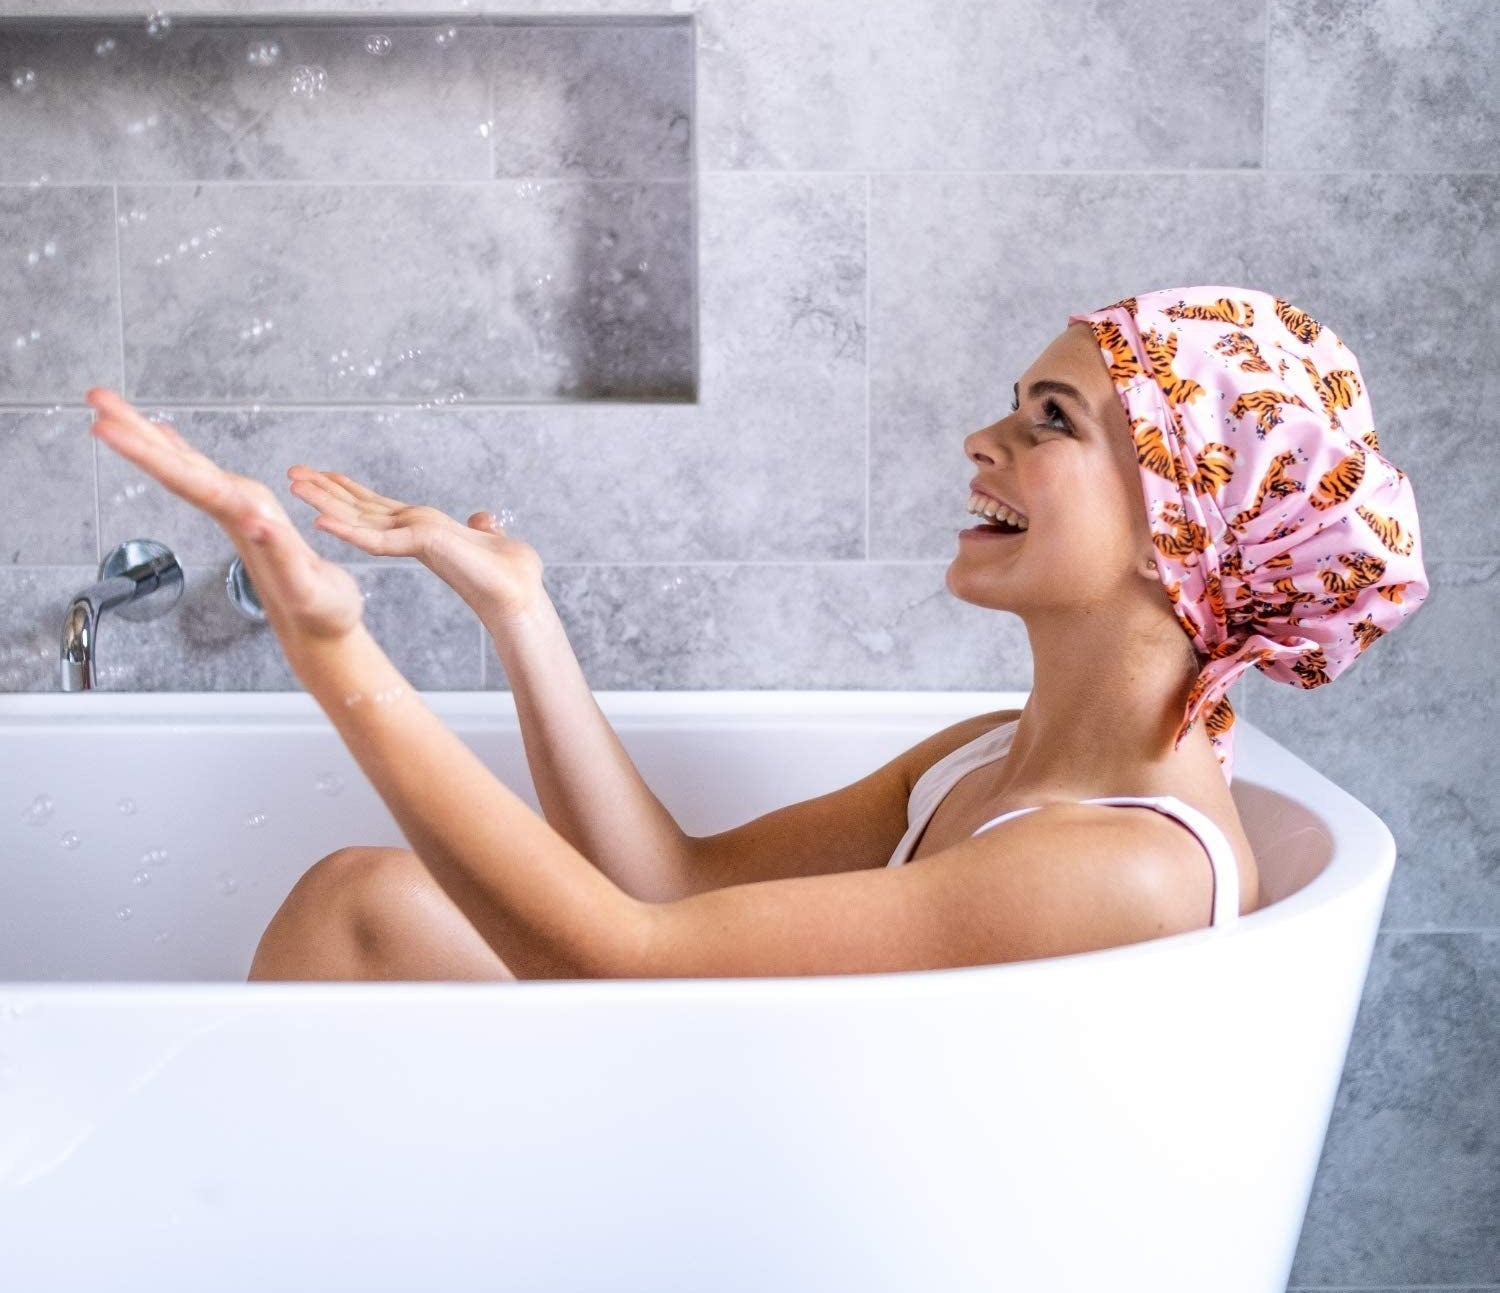 A person sitting in a bath tub while wearing the adjustable shower cap